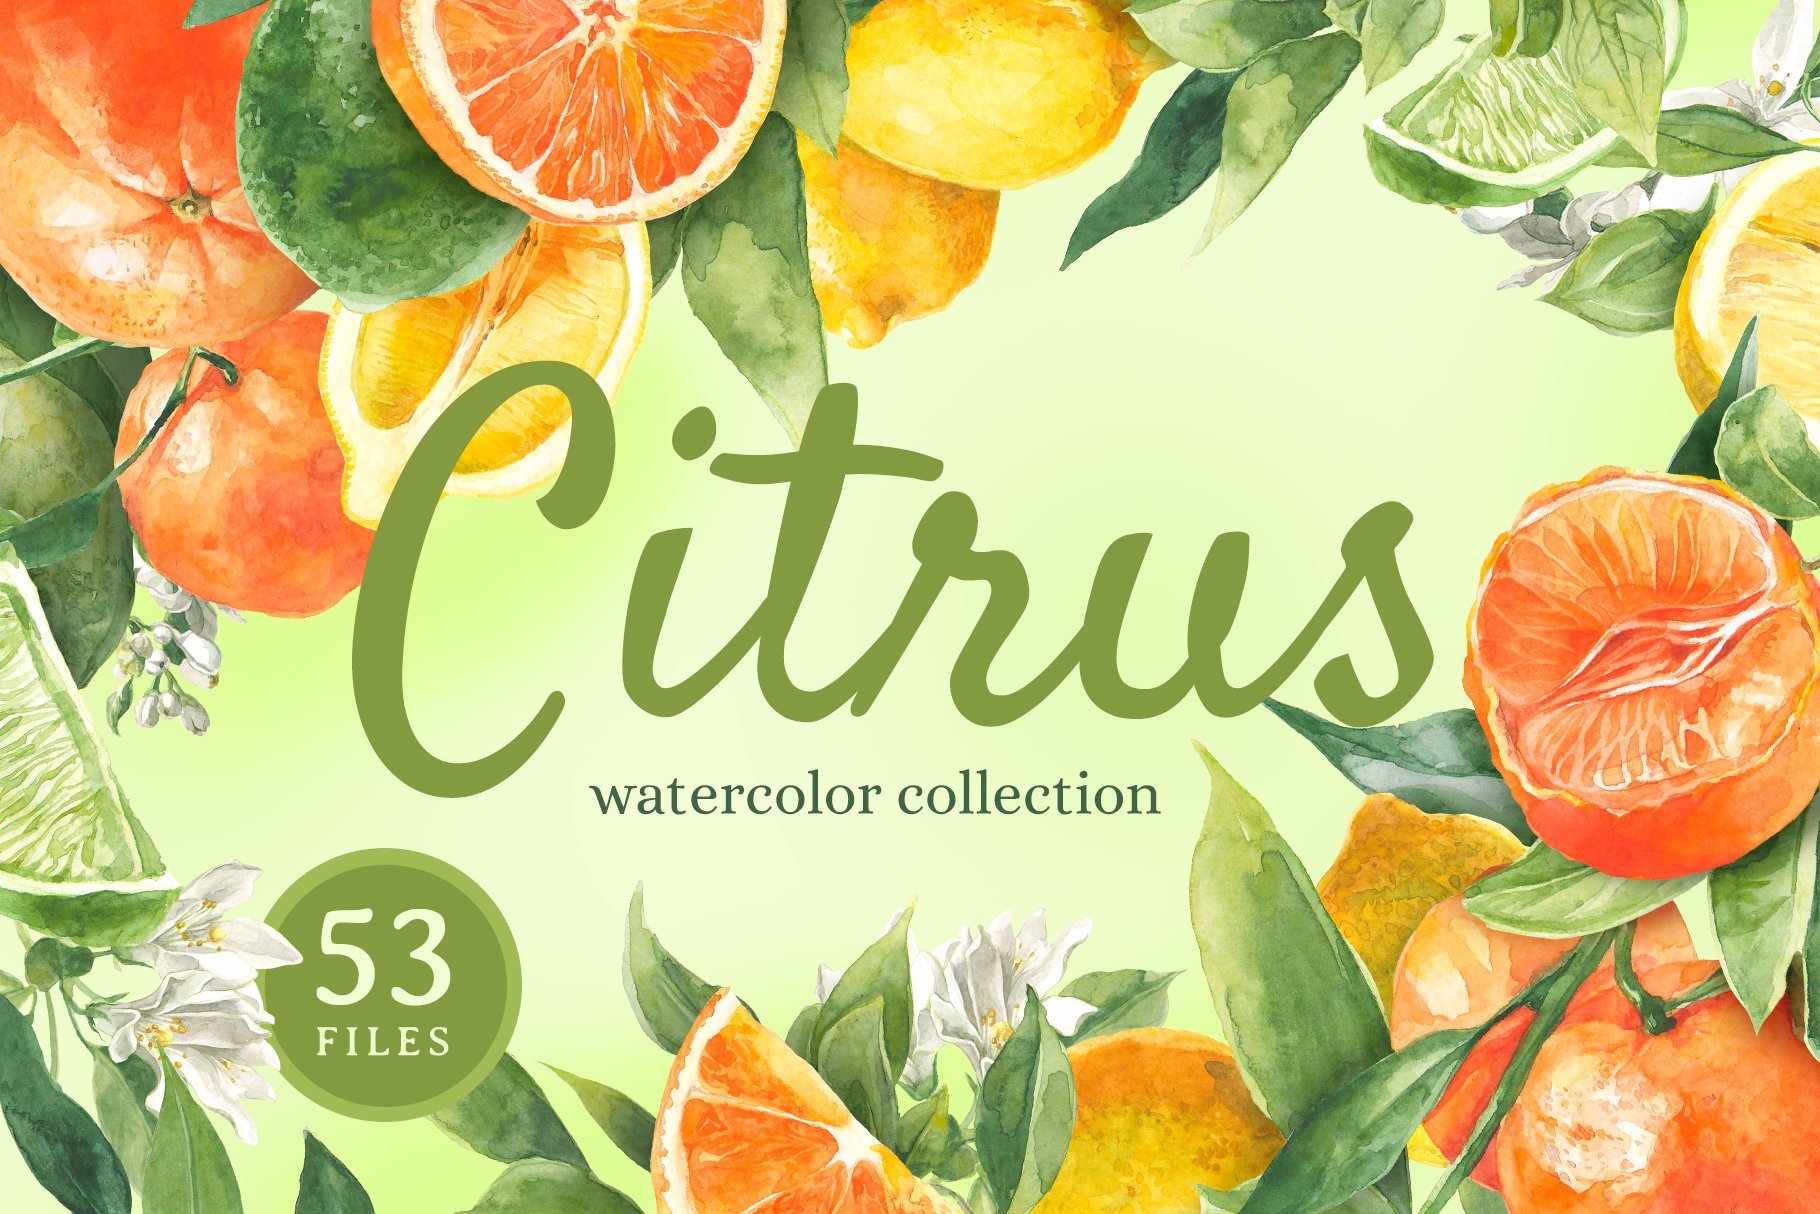 "Citrus" watercolor collection cover image.